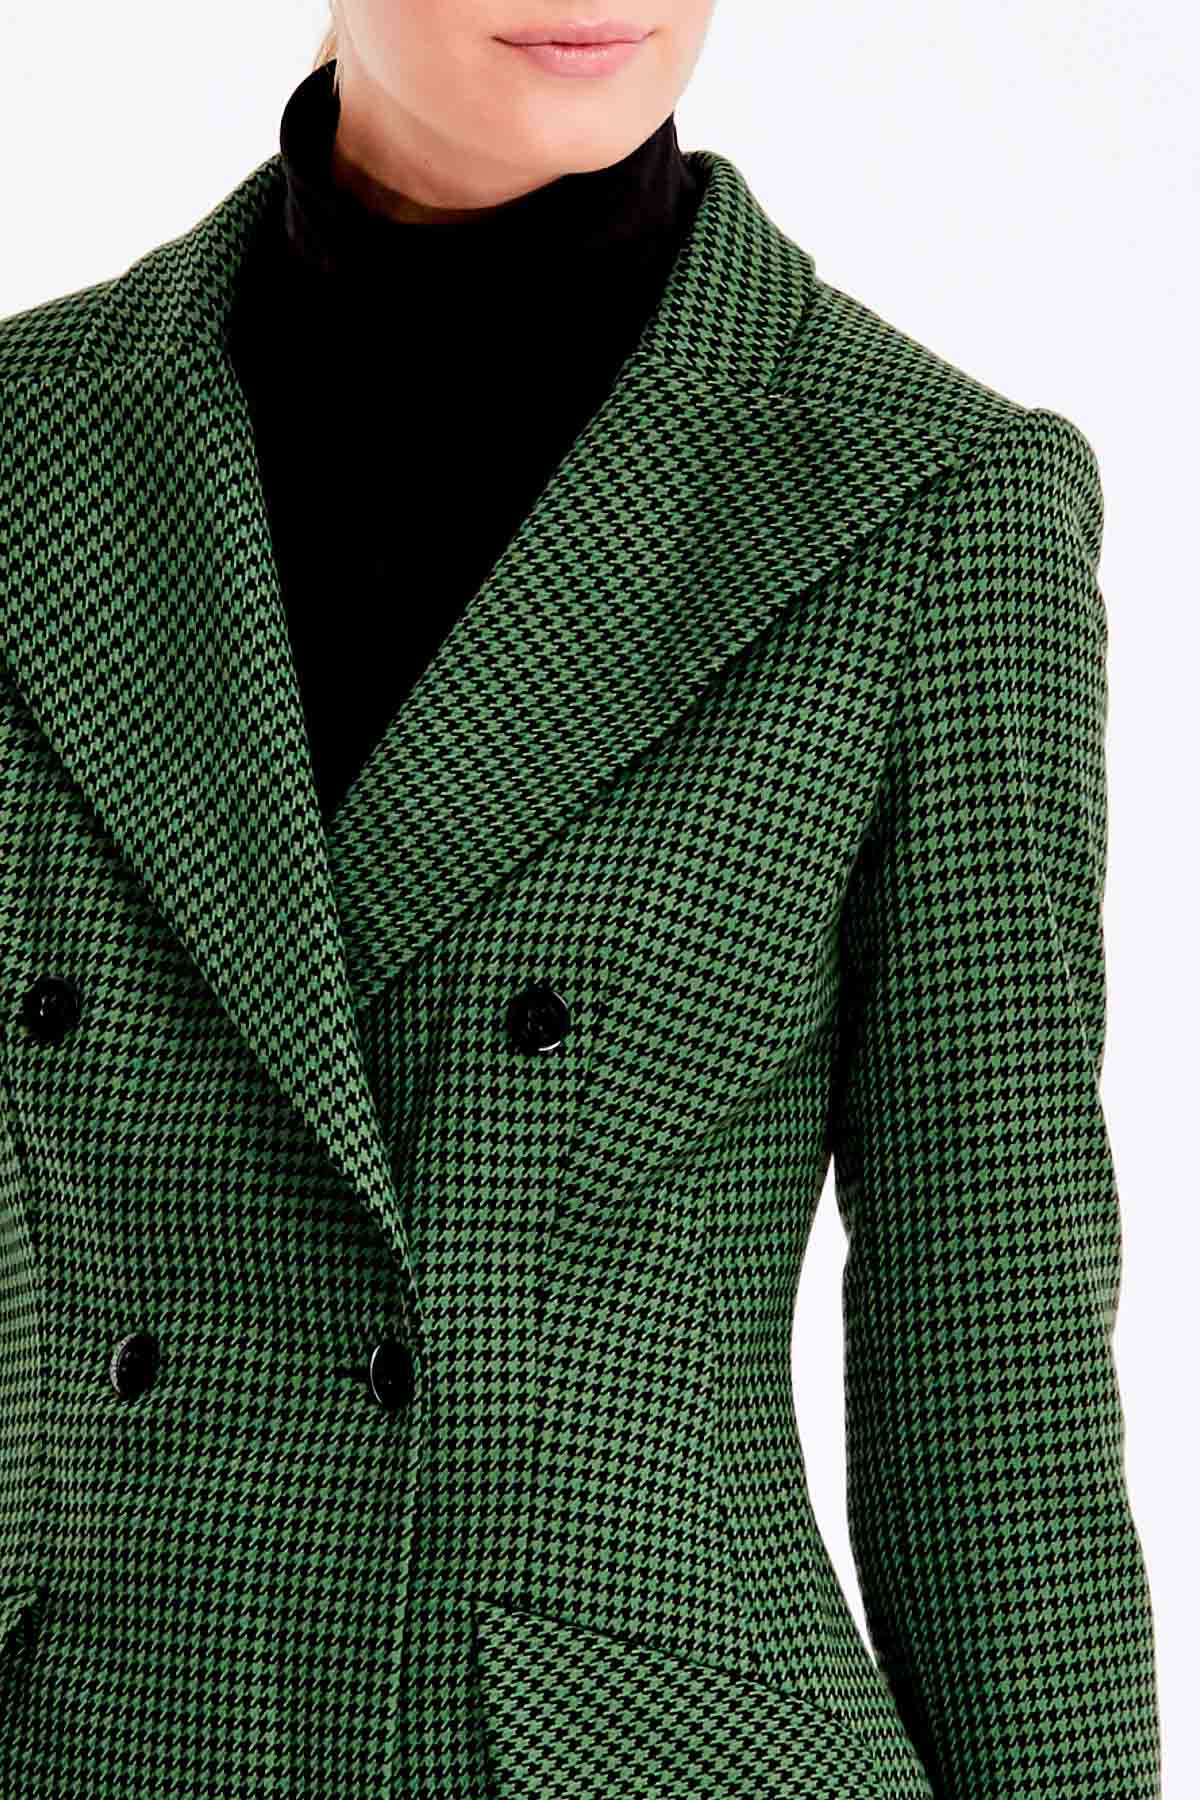 Double-breasted green jacket with a houndstooth print and pockets, photo 1